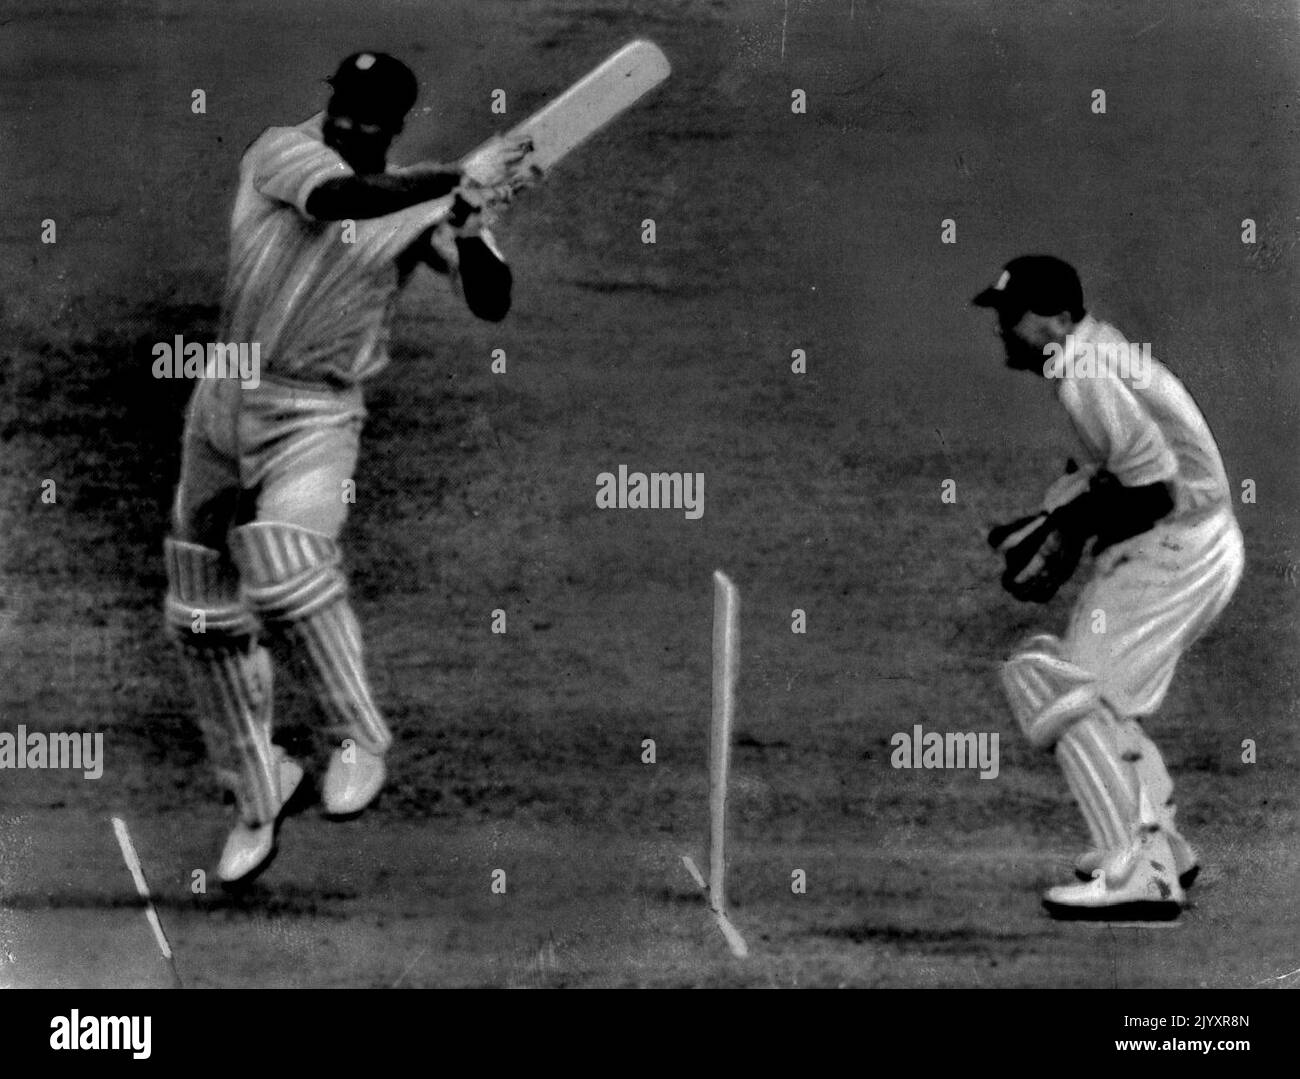 Clyde Walcott hooks Lock for four during his 220 in the second Test against England. Walcott is now rated No. 1 batsman in the 'W's Trinity. March 25, 1955. Stock Photo